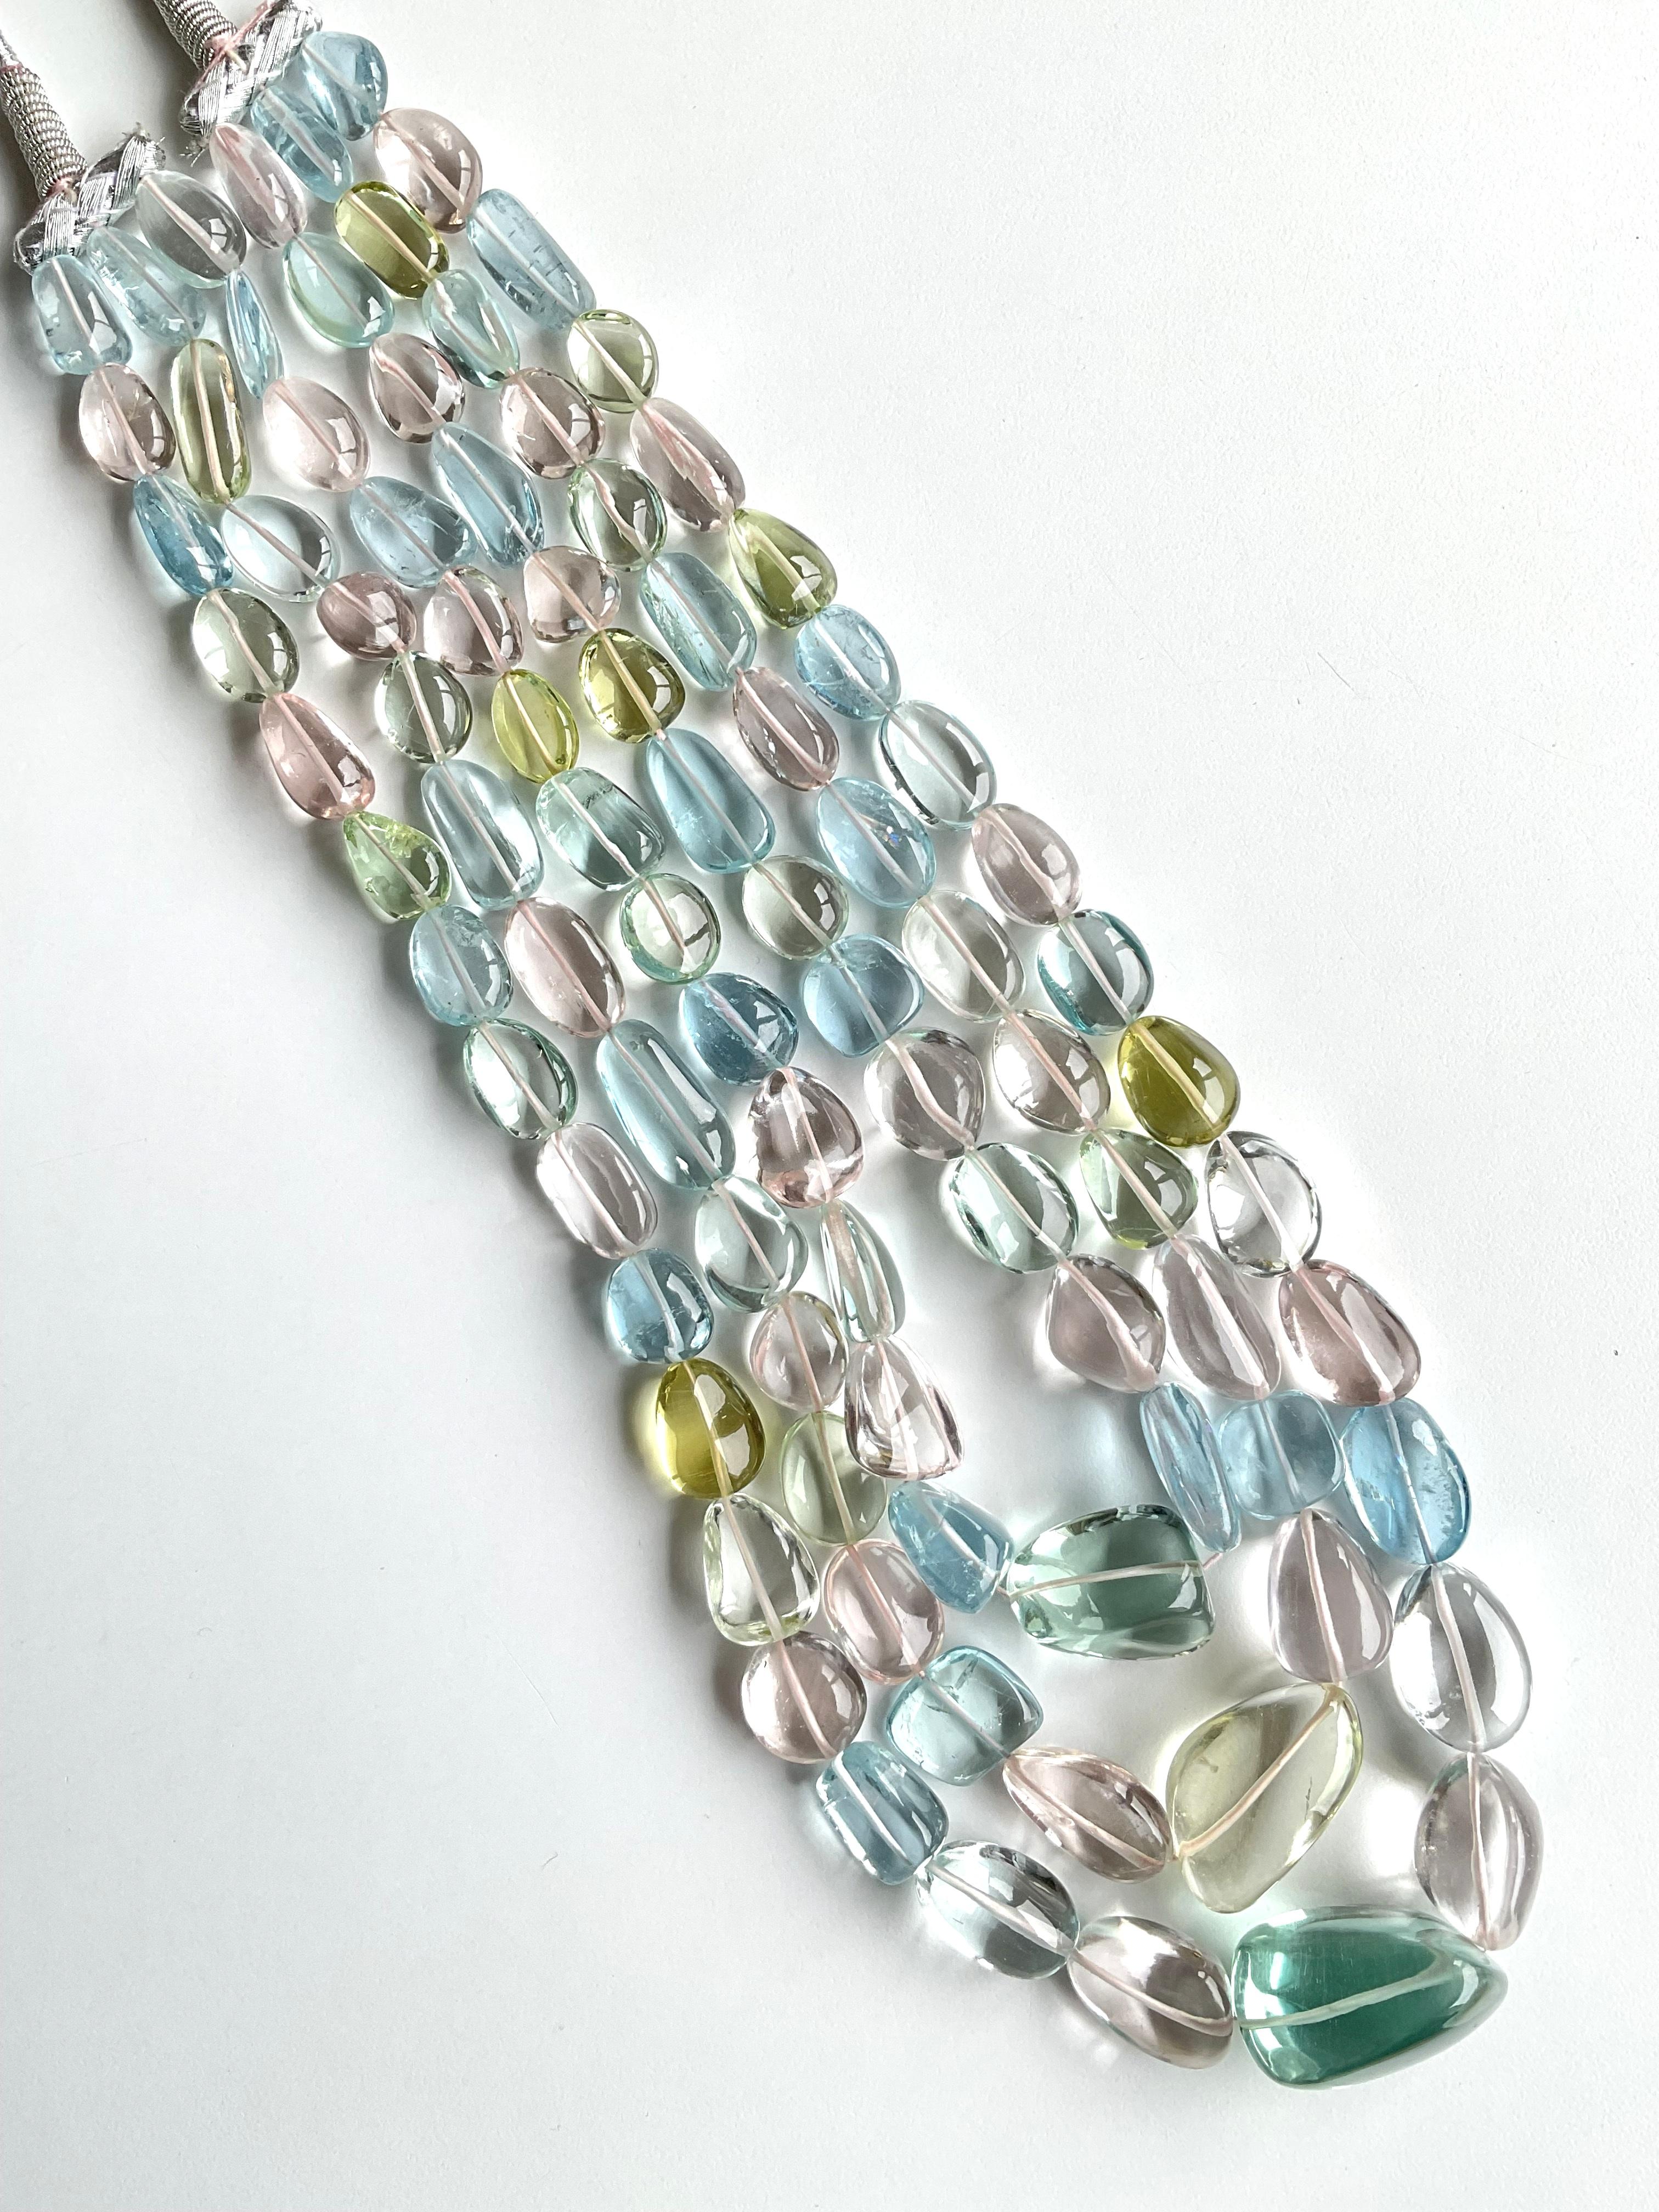 1362.55 Carats Multiple colors Beryl Tumbled Necklace For Fine Jewelry Gemstones For Sale 2